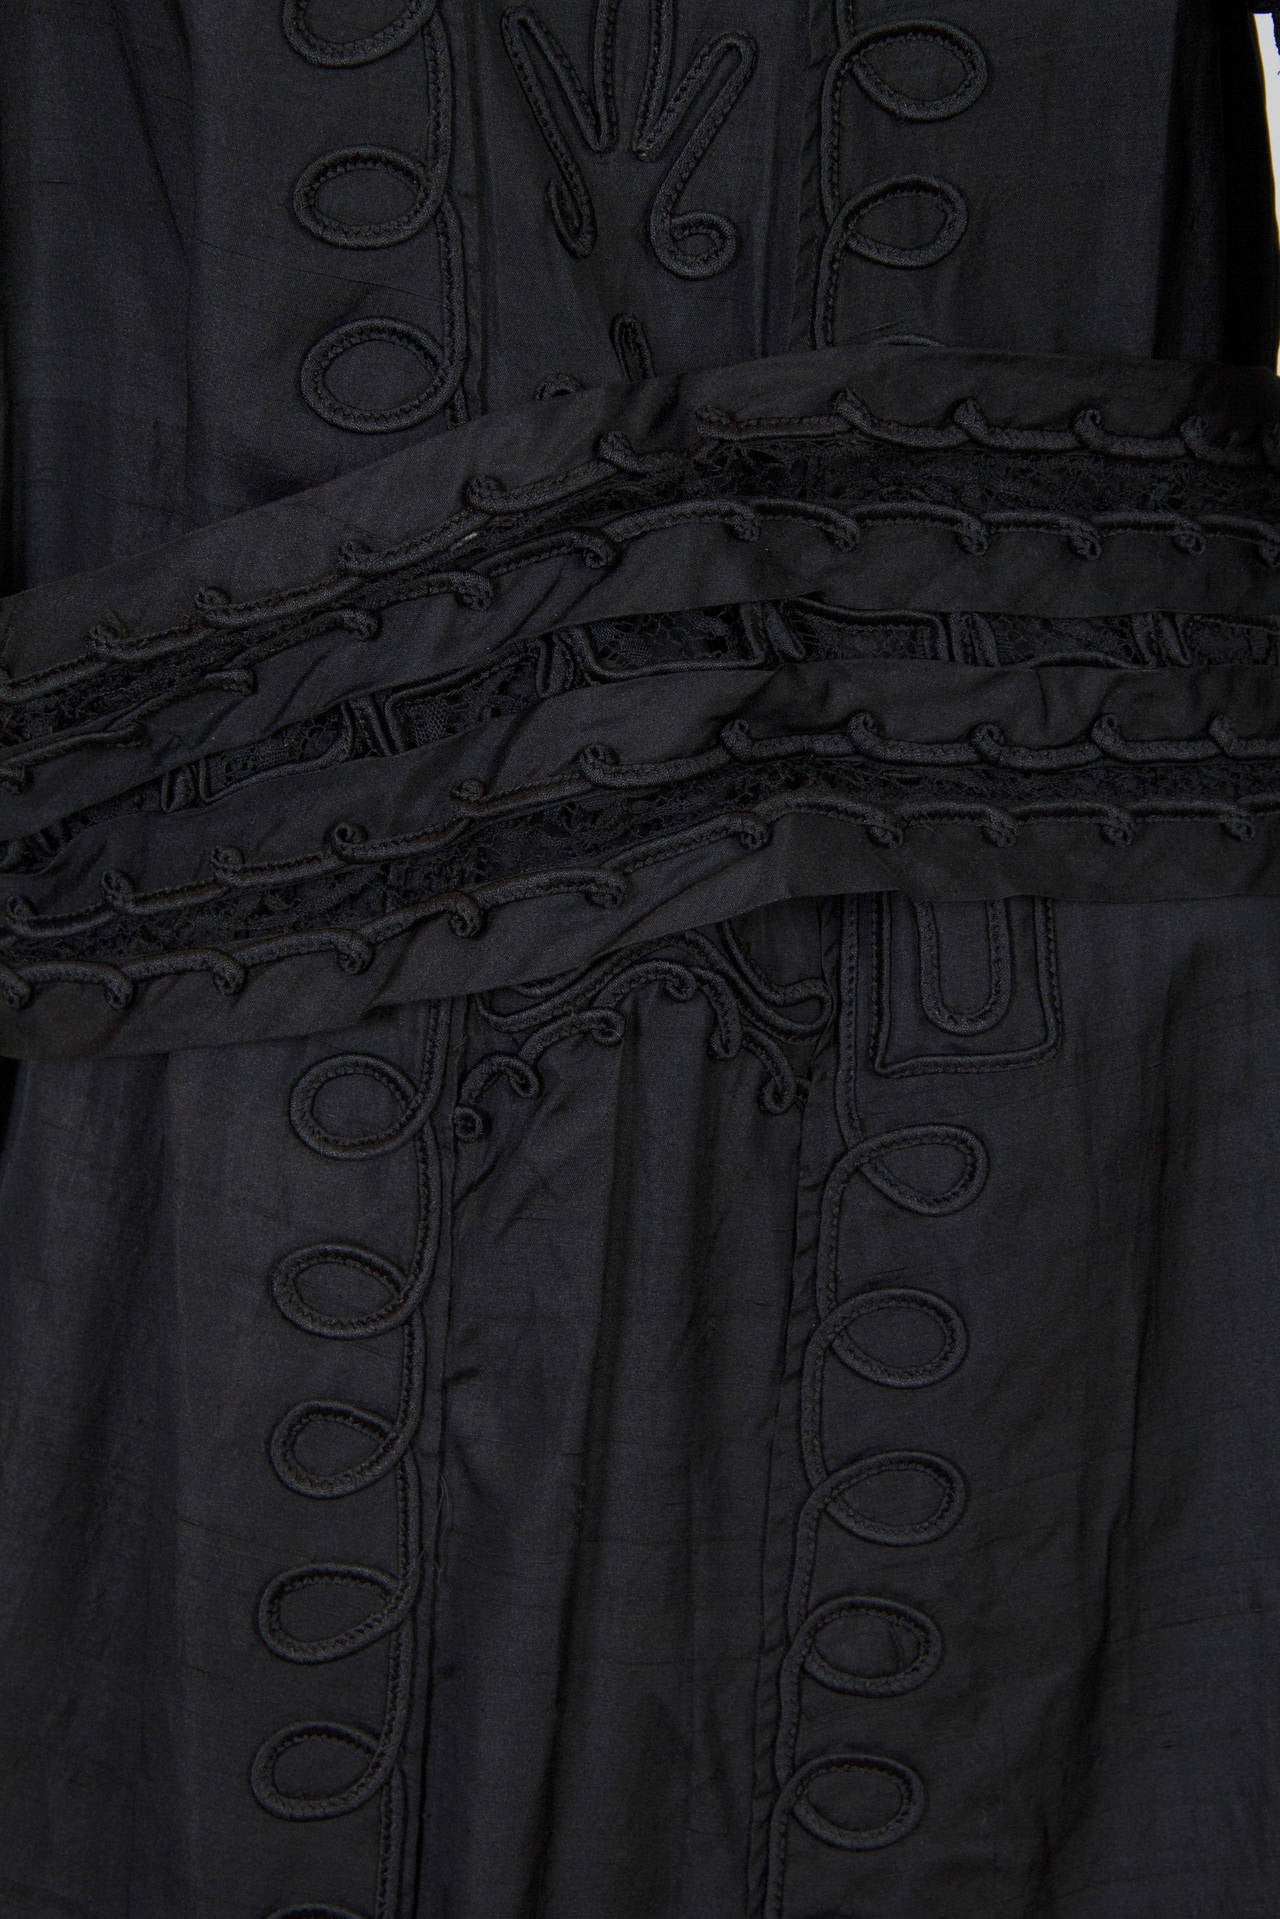 Edwardian Black Silk Dupioni & Lace Duster With Beaded Braided Trim In Excellent Condition For Sale In New York, NY